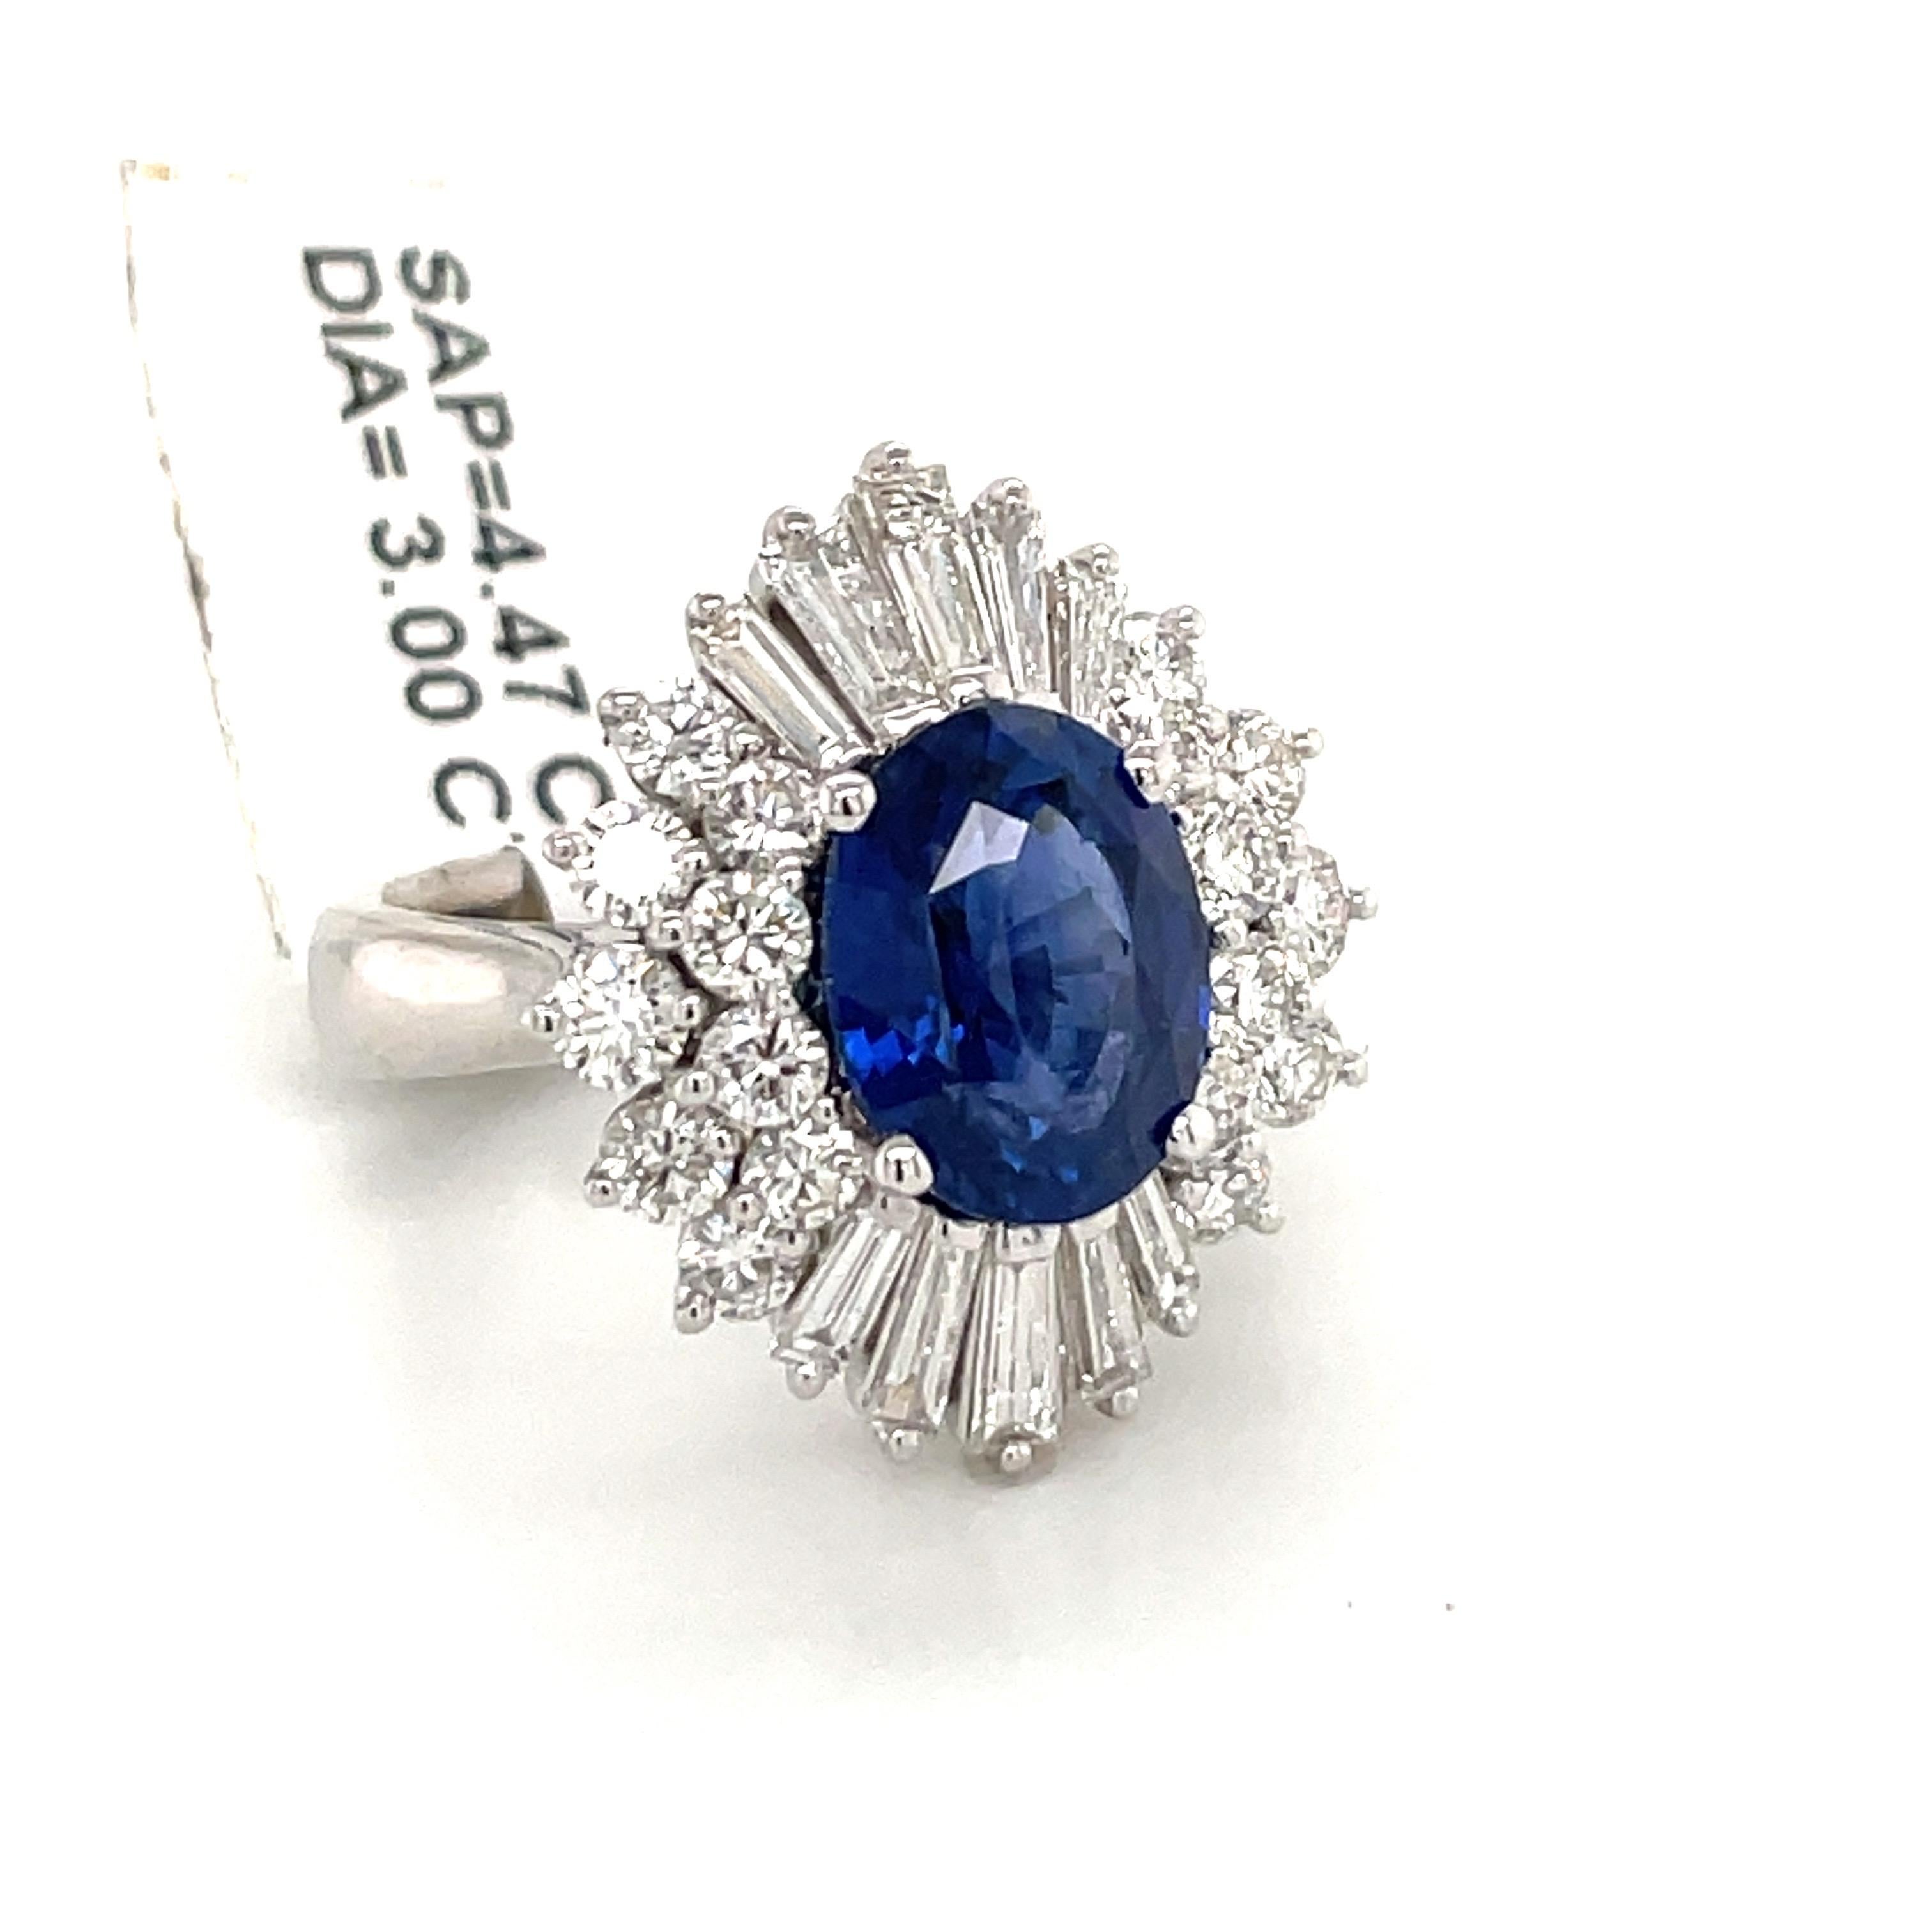 Impressive cluster earrings featuring a gorgeous oval shape blue Sapphires weighing 4.47 carats flanked with a cluster of round brilliants and tapered baguettes weighing 3 carats.
Color G-H
Clarity VS-SI

Gorgeous Sapphire color.
Ring Is Sizeable. 